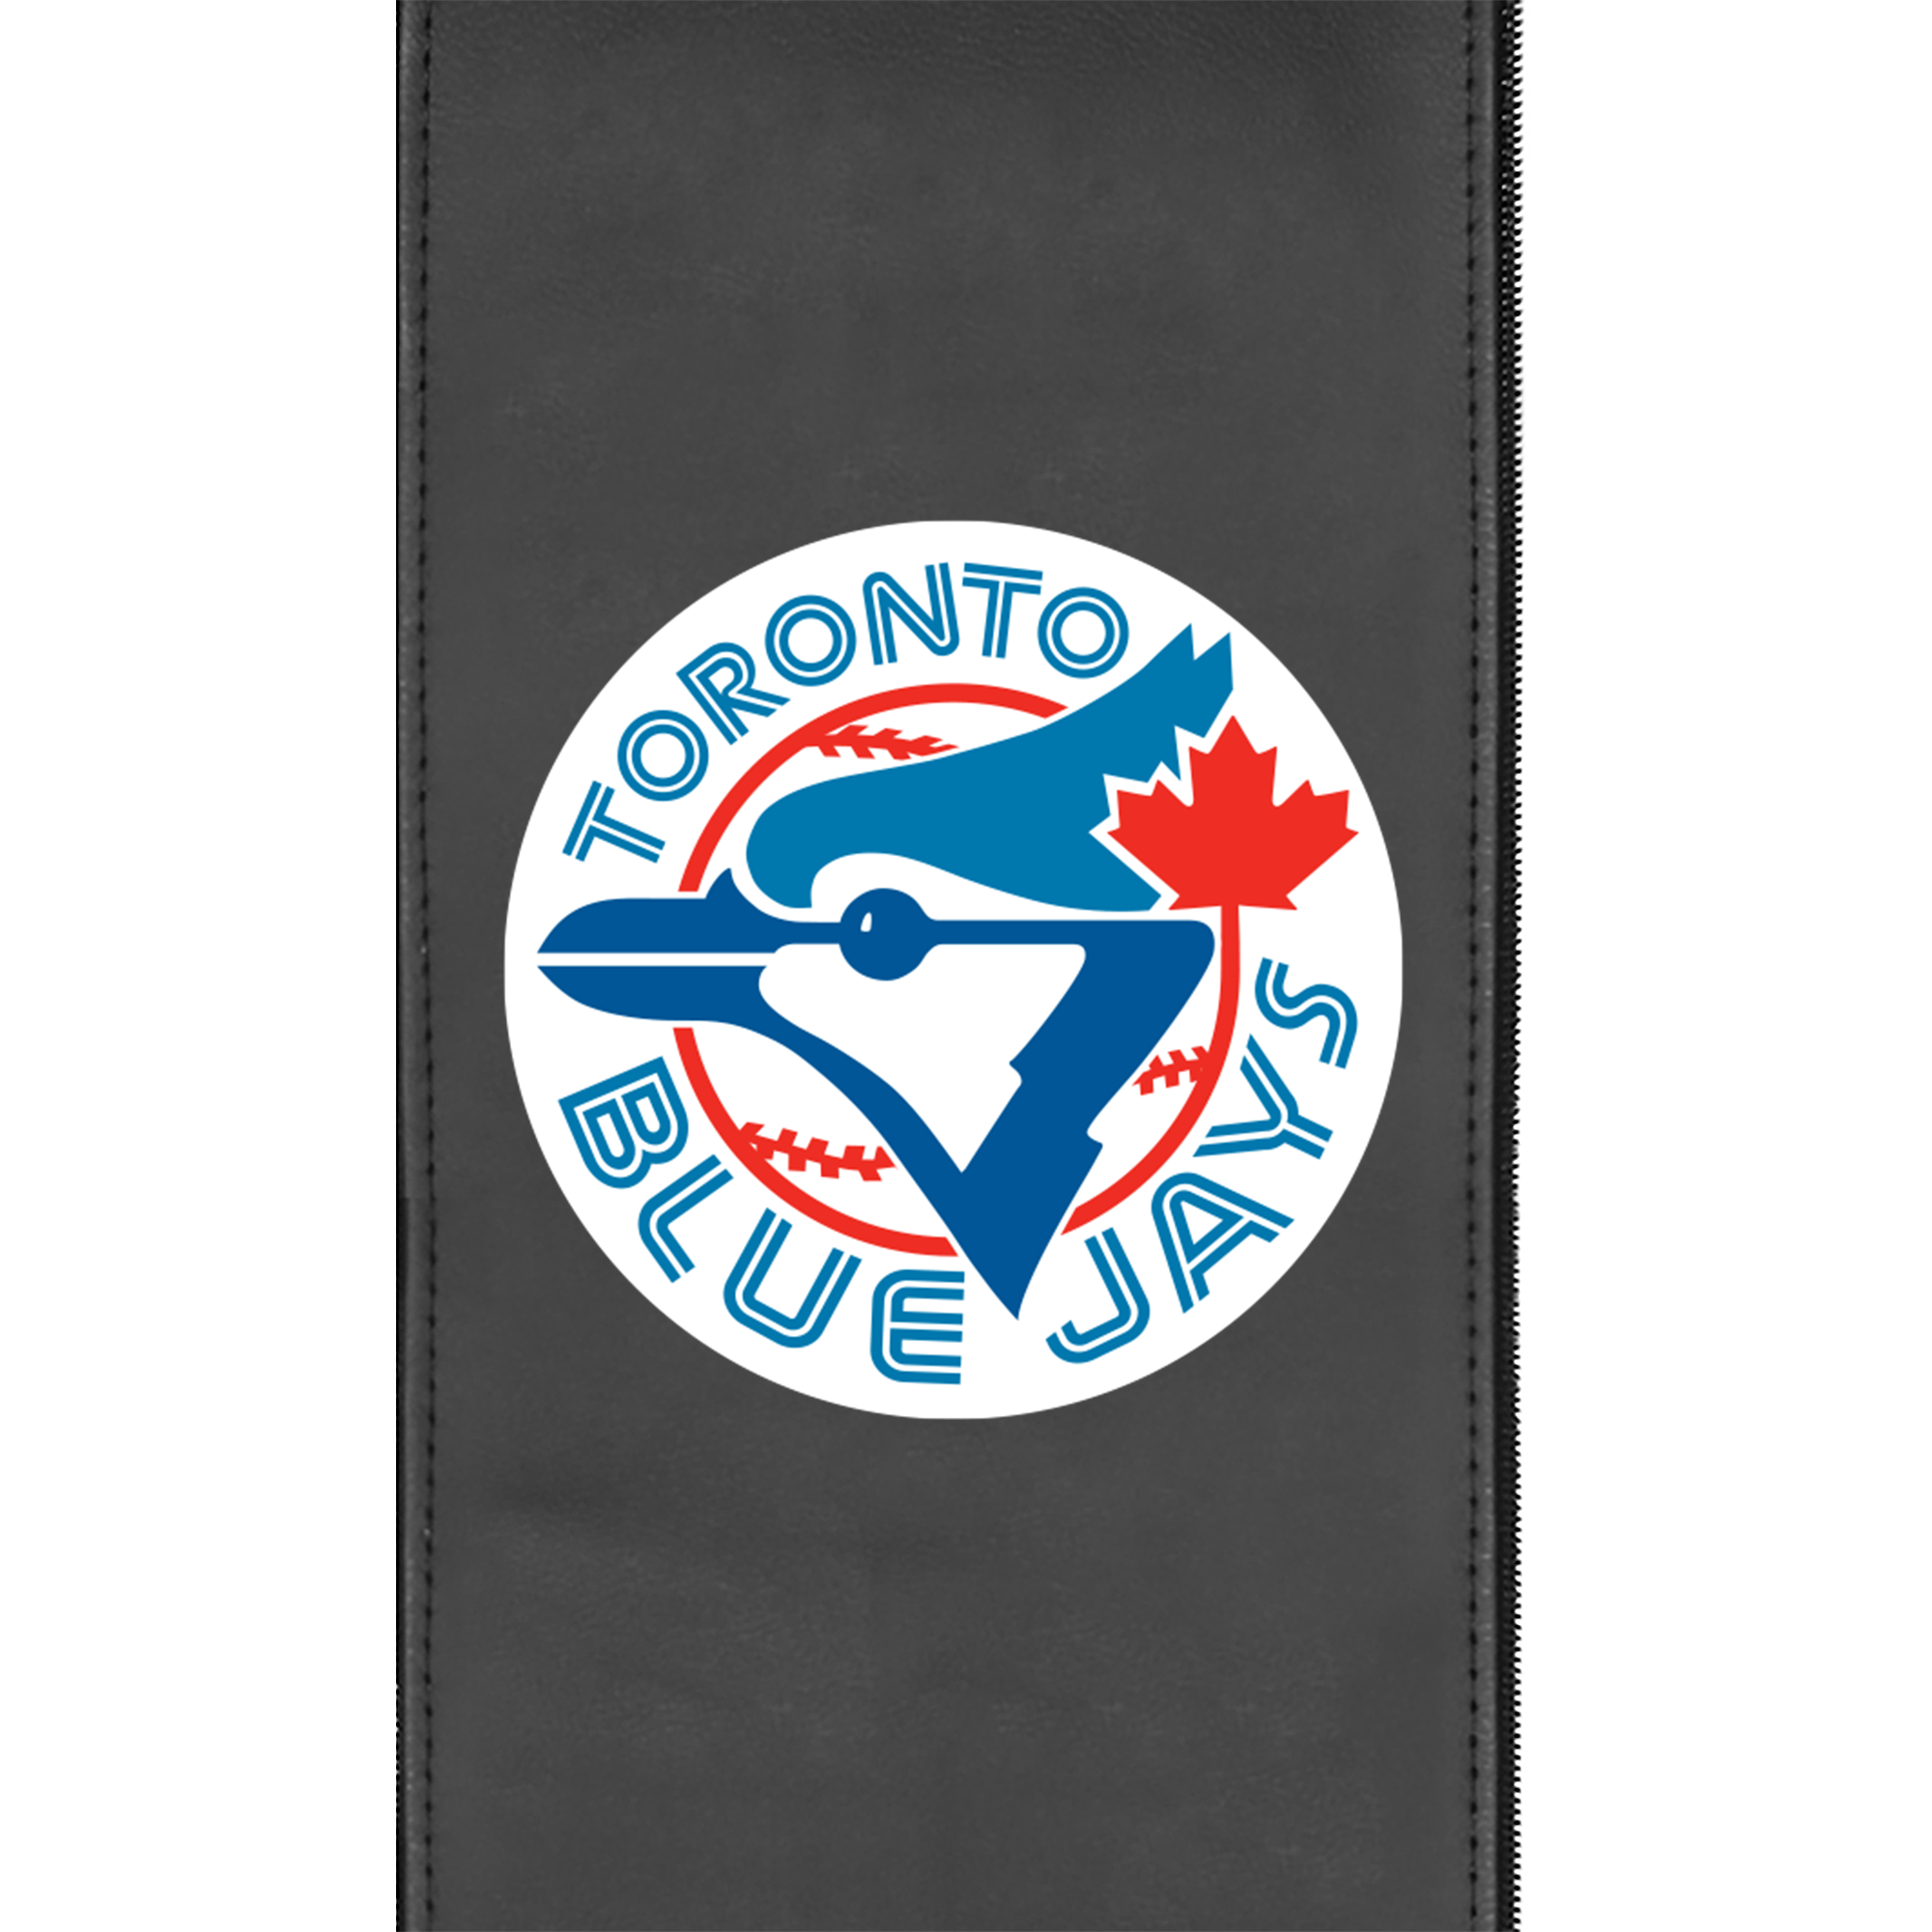 SuiteMax 3.5 VIP Seats with Toronto Blue Jays Cooperstown Logo